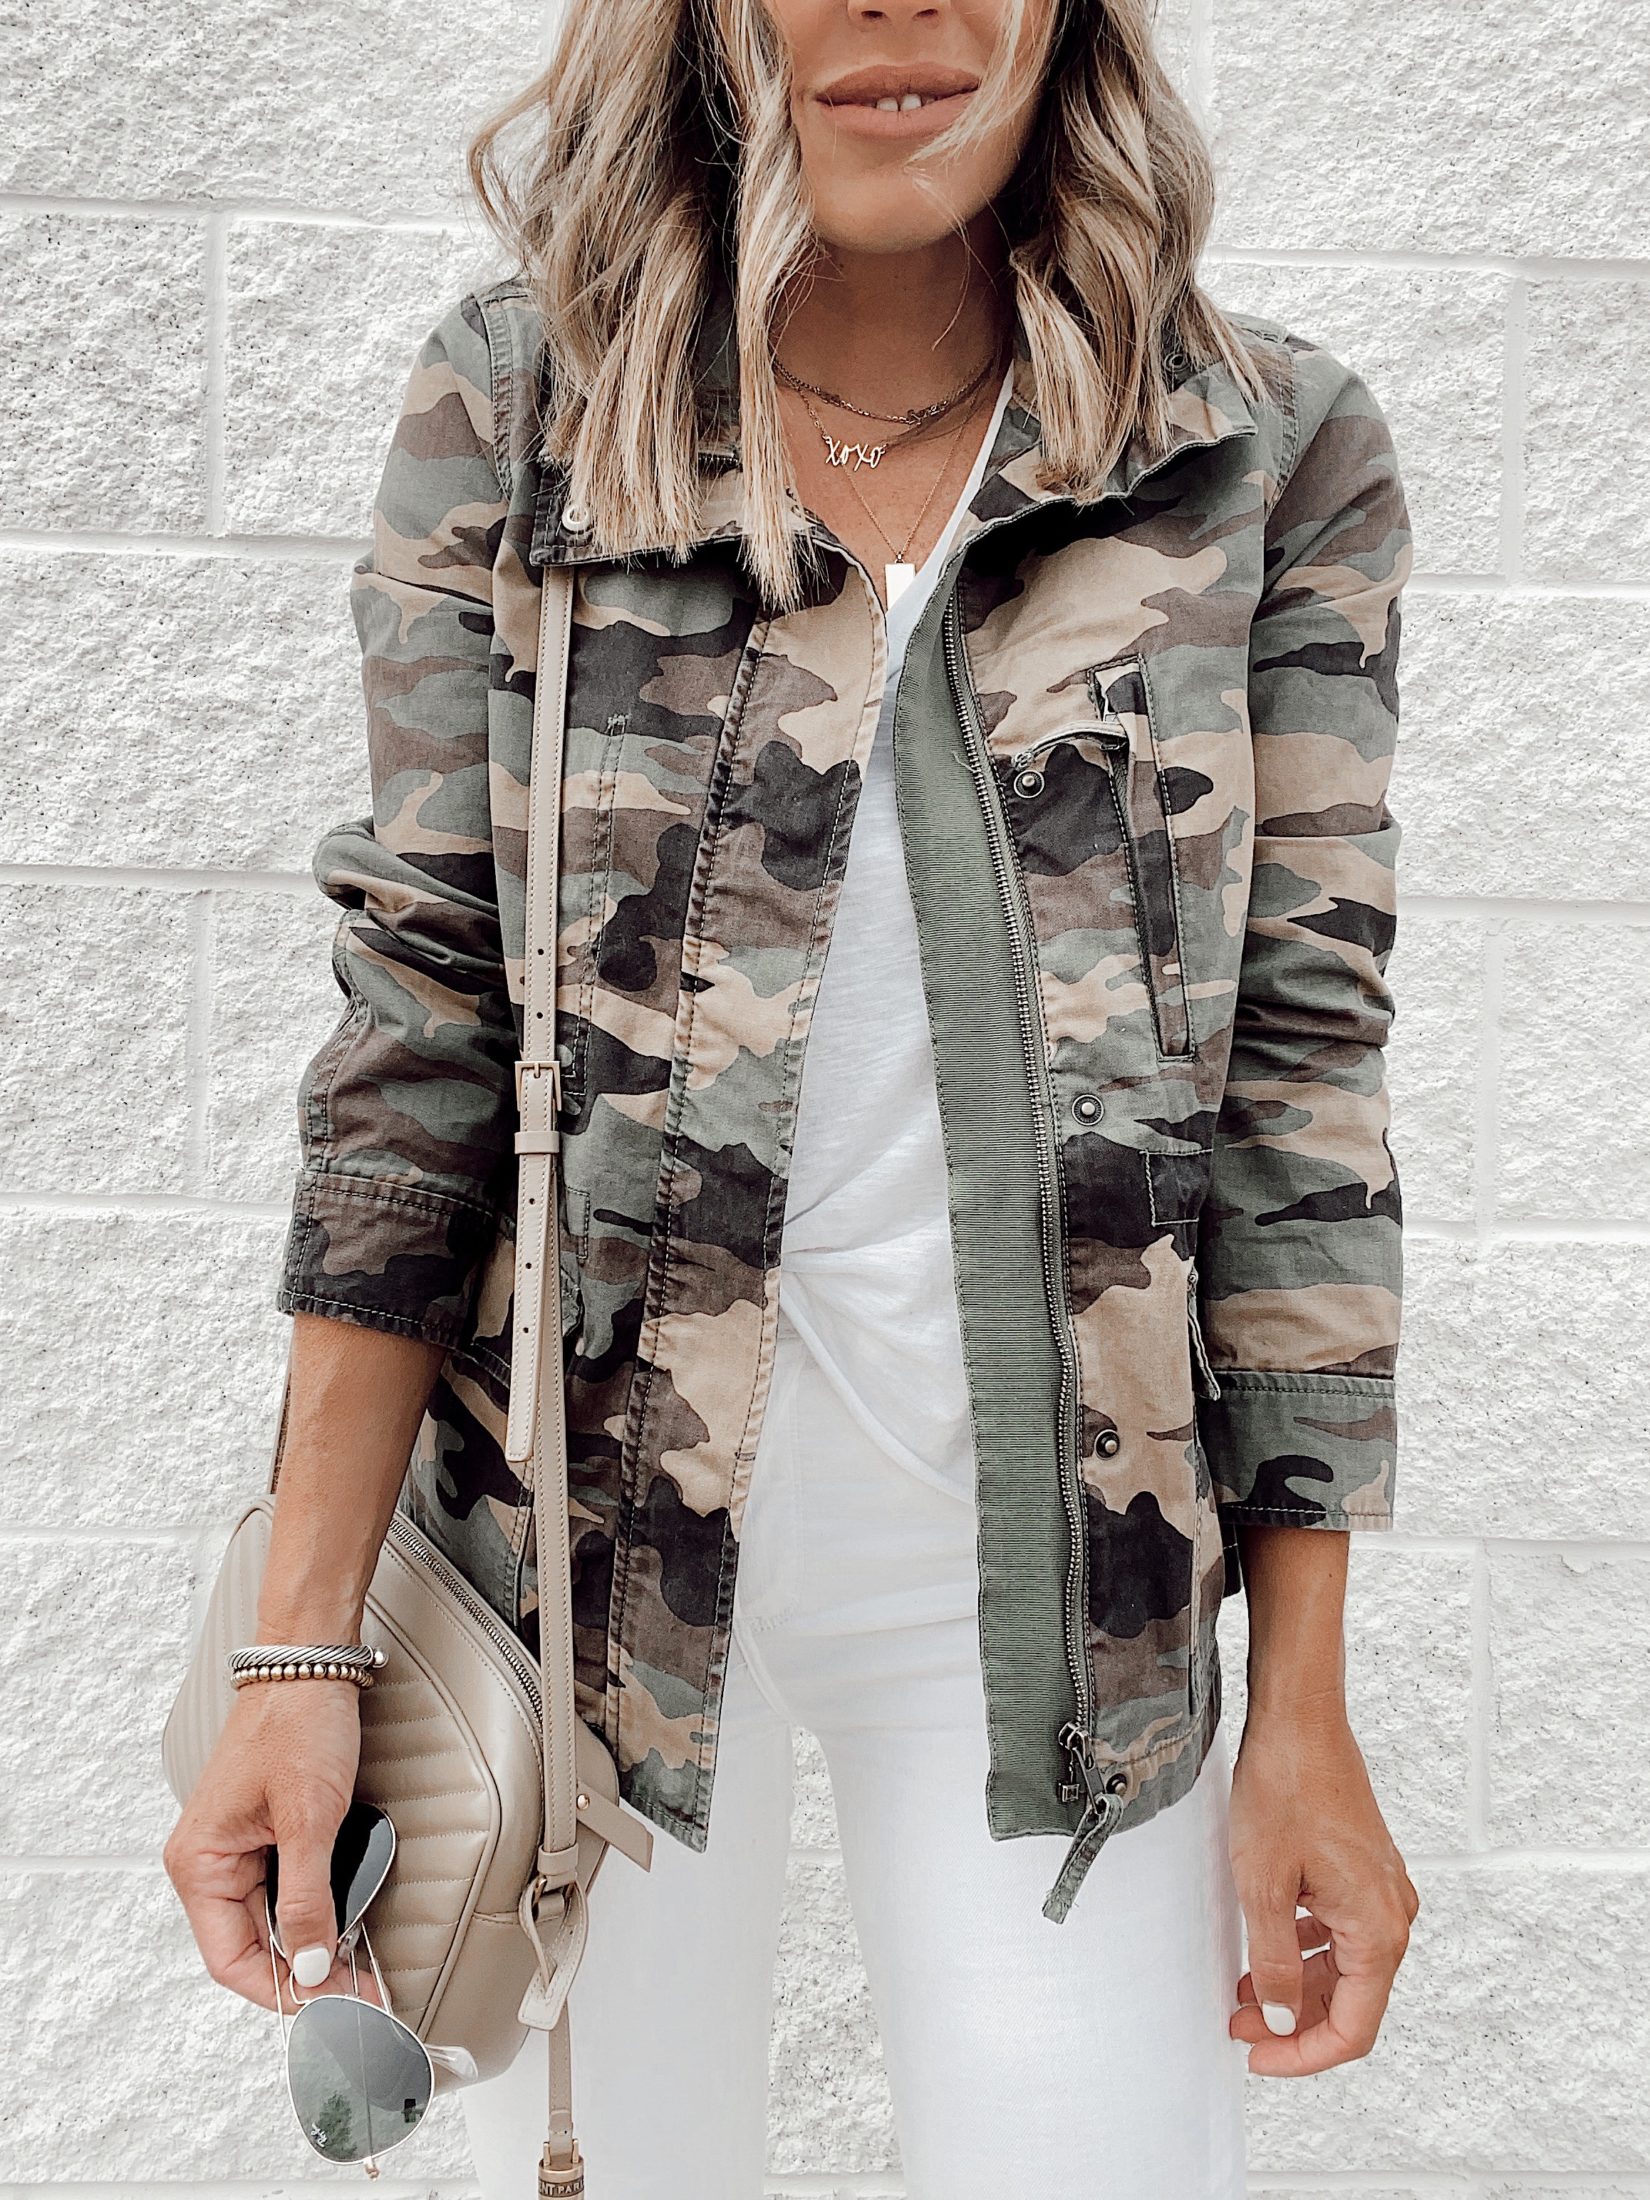 jaime shrayber wearing madewell dispatch camo jacket from nordstrom anniversary sale 2020